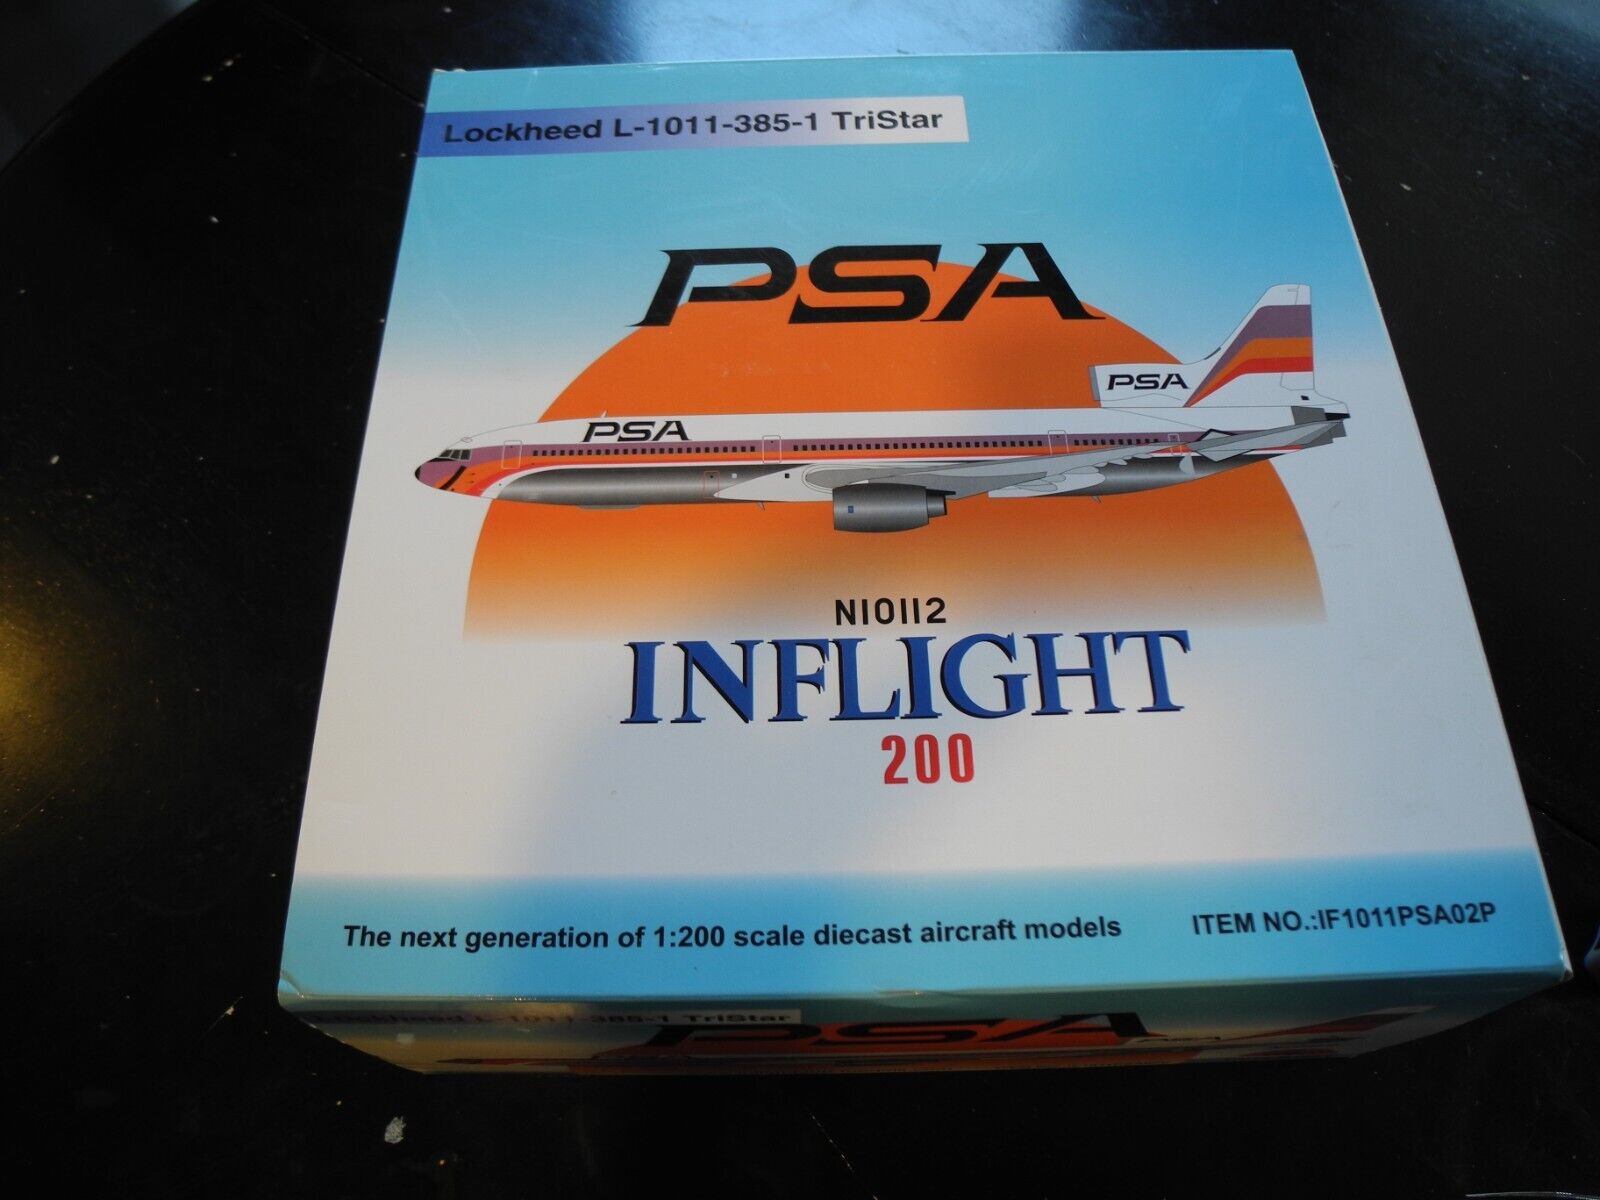 Extremely Rare INFLIGHT Lockheed L-1011 PSA, 1:200, Retired, REDUCED